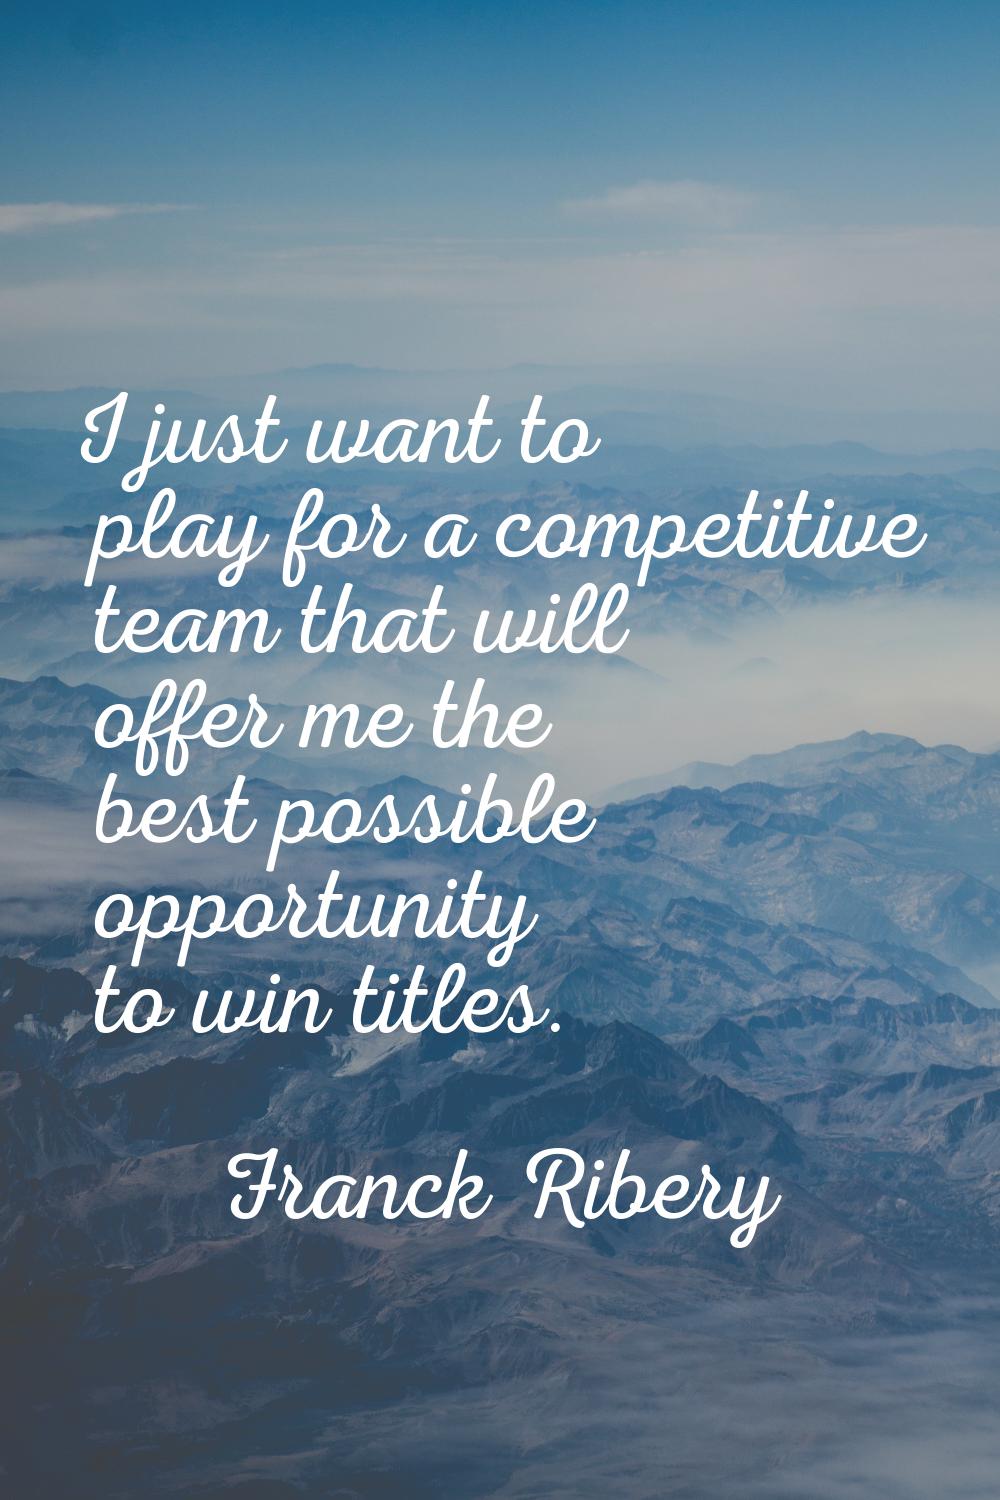 I just want to play for a competitive team that will offer me the best possible opportunity to win 